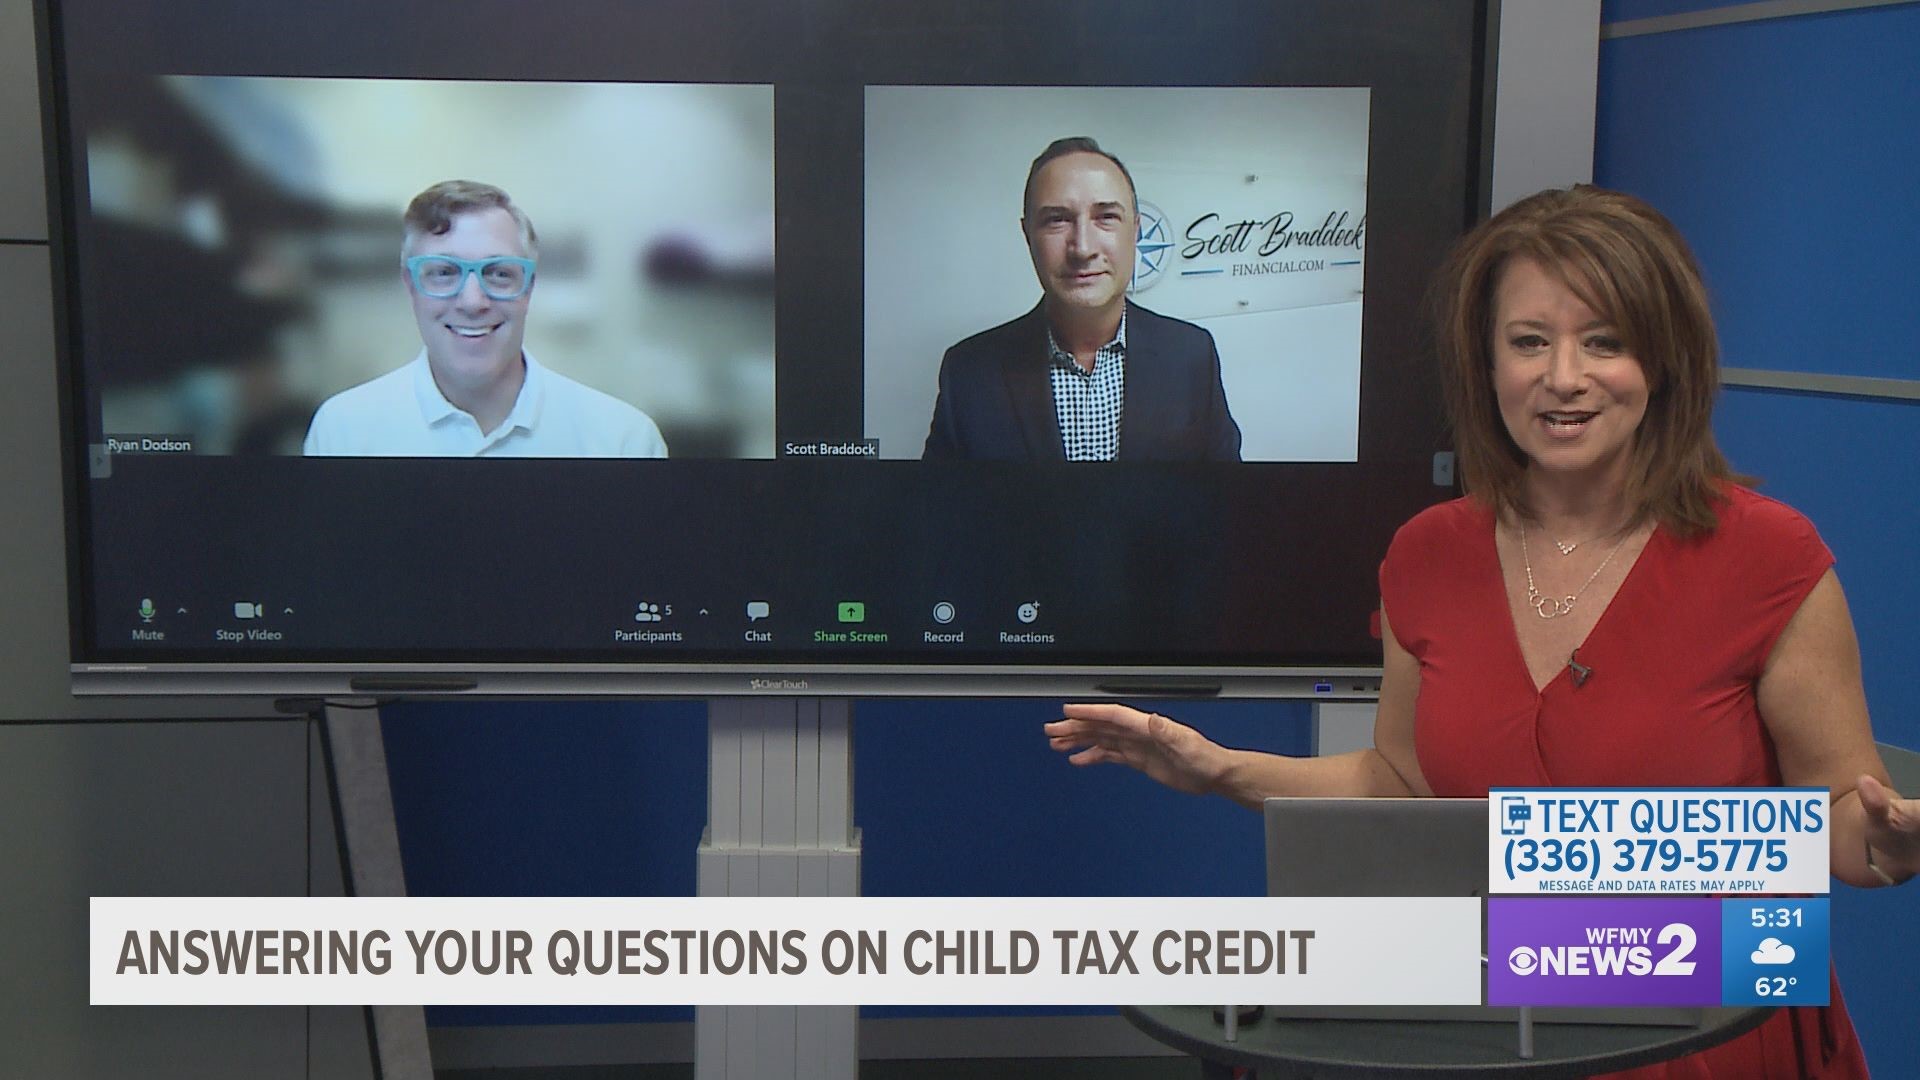 Scott Braddock from Scott Braddock Financial and Ryan Dodson from Liberty Tax Services answer your Child Tax Credit Payment questions.